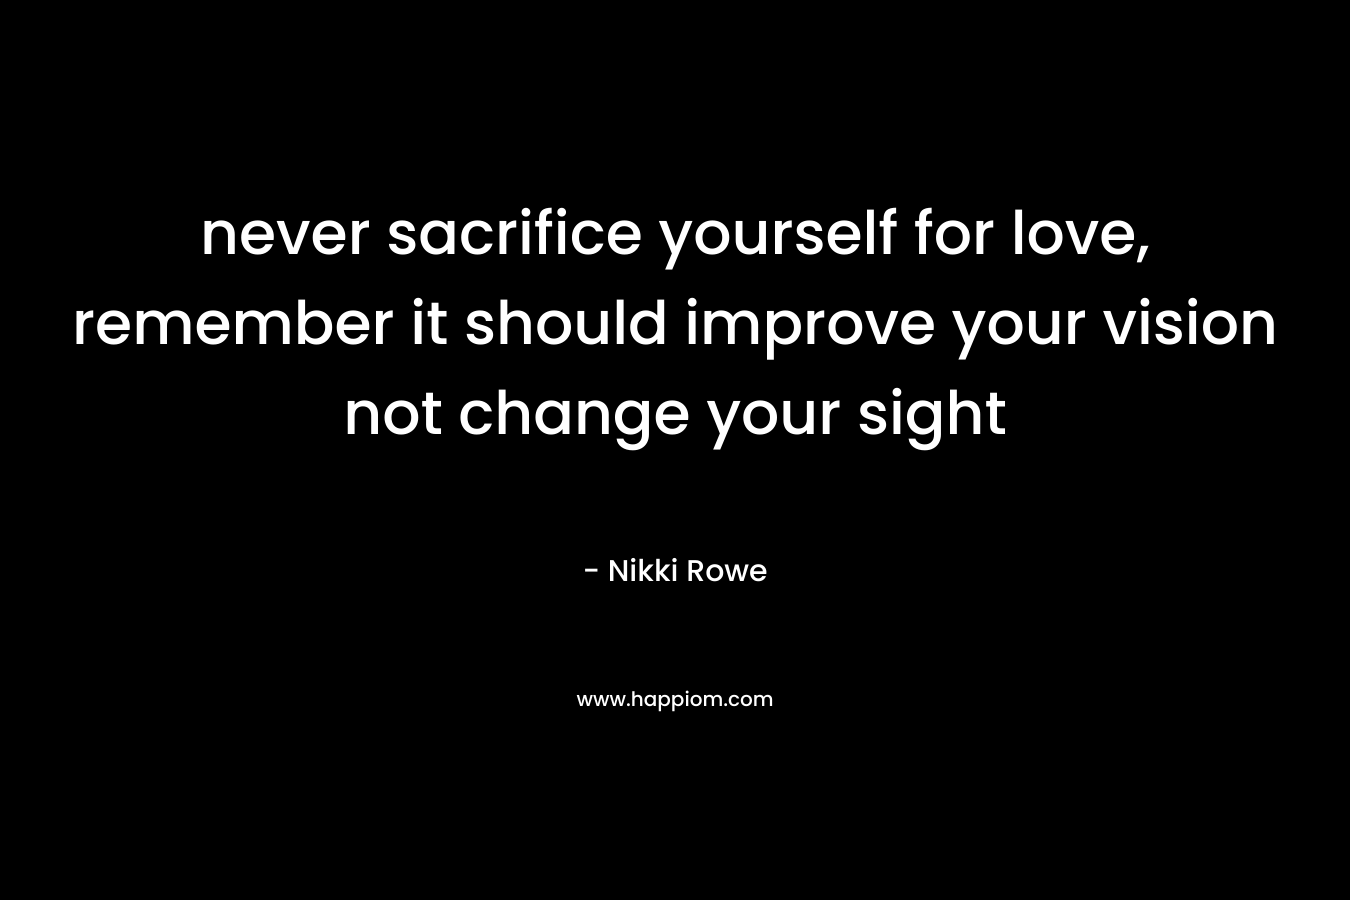 never sacrifice yourself for love, remember it should improve your vision not change your sight – Nikki Rowe